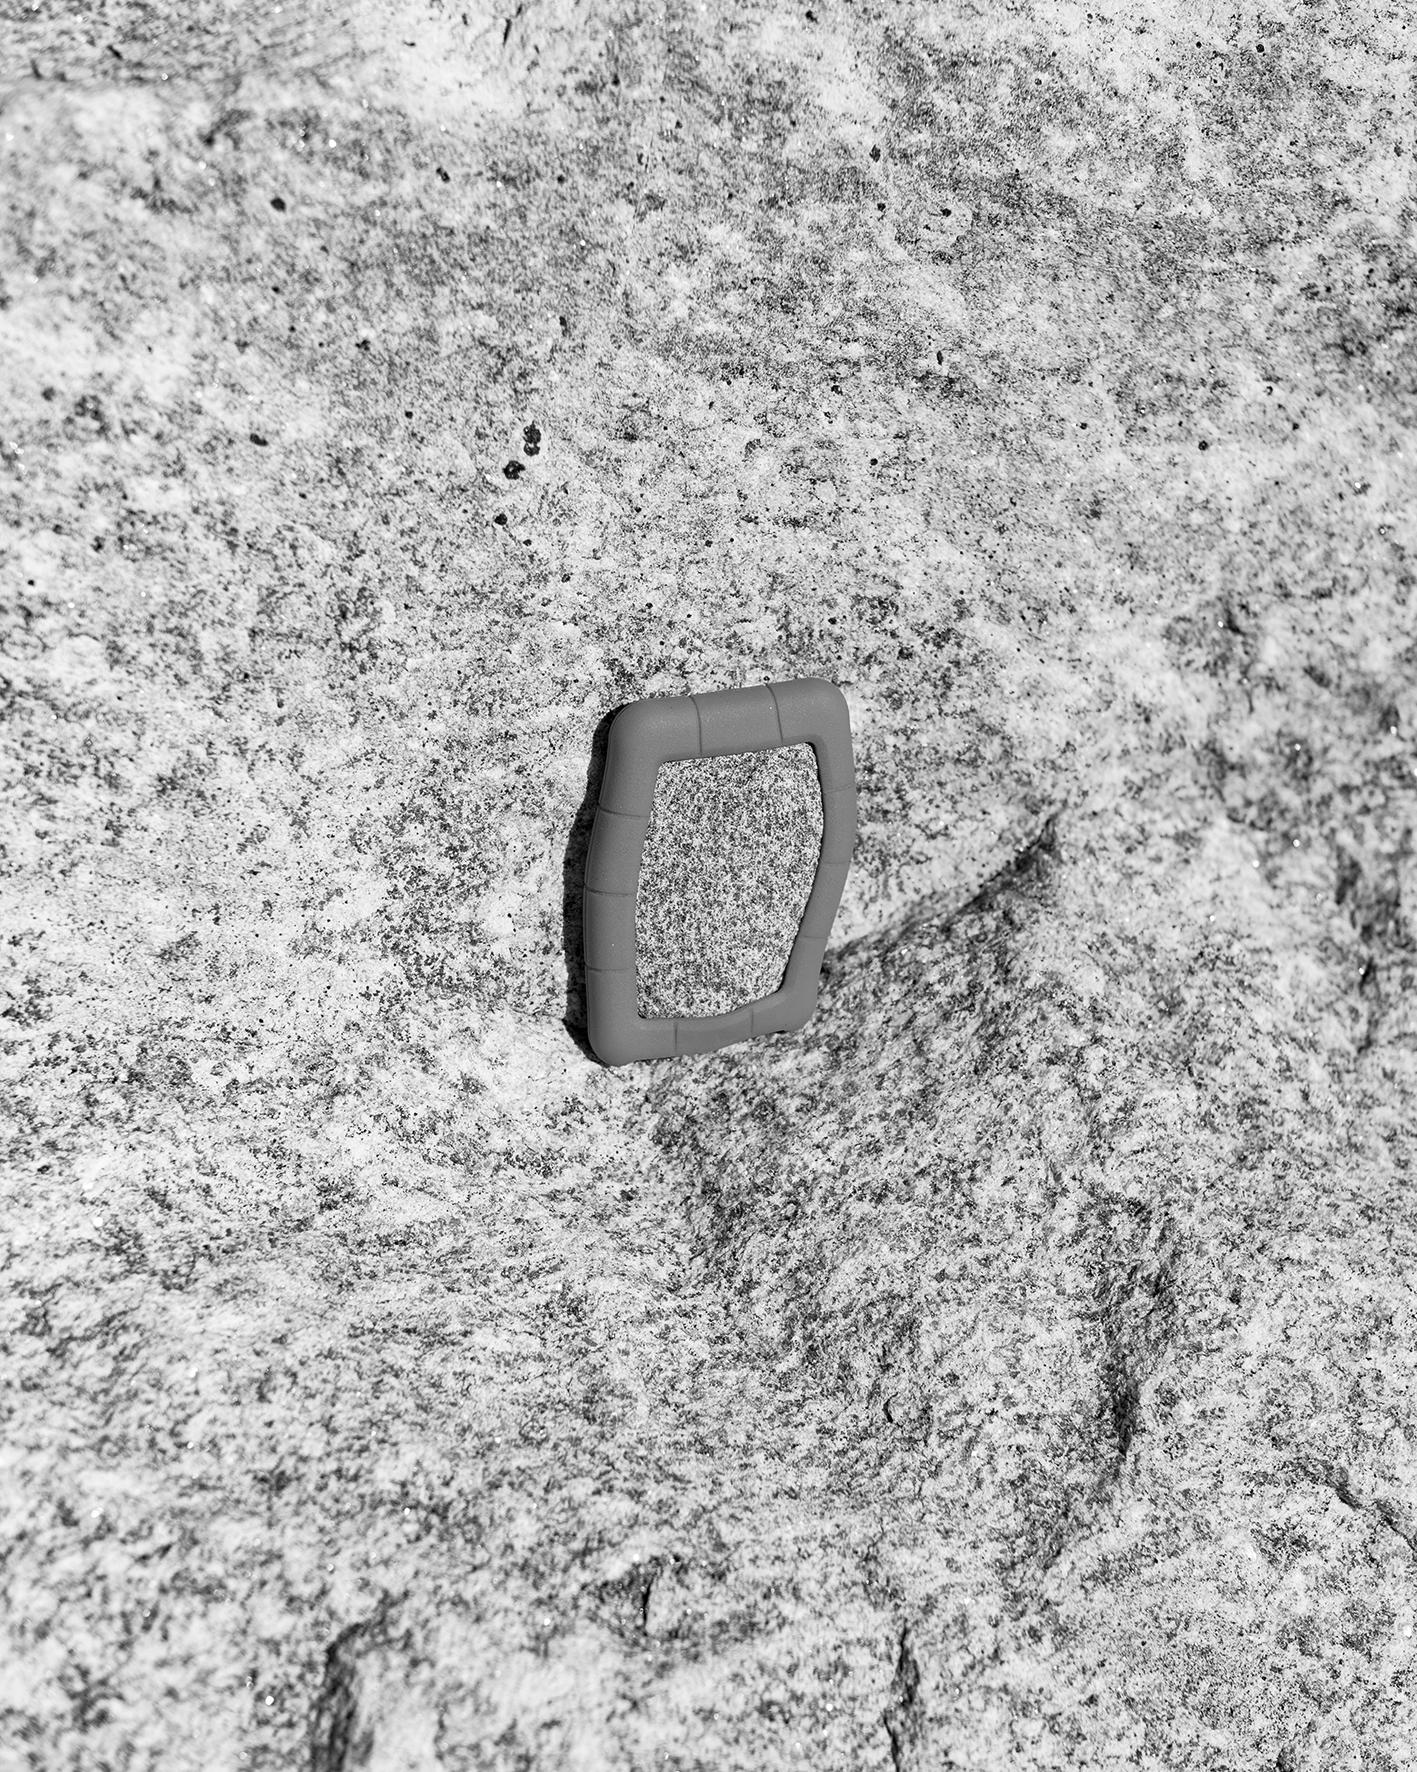 A black and white photo of a granite rock encased in a silicon hard drive cover, positioned against a similar looking granite rock.